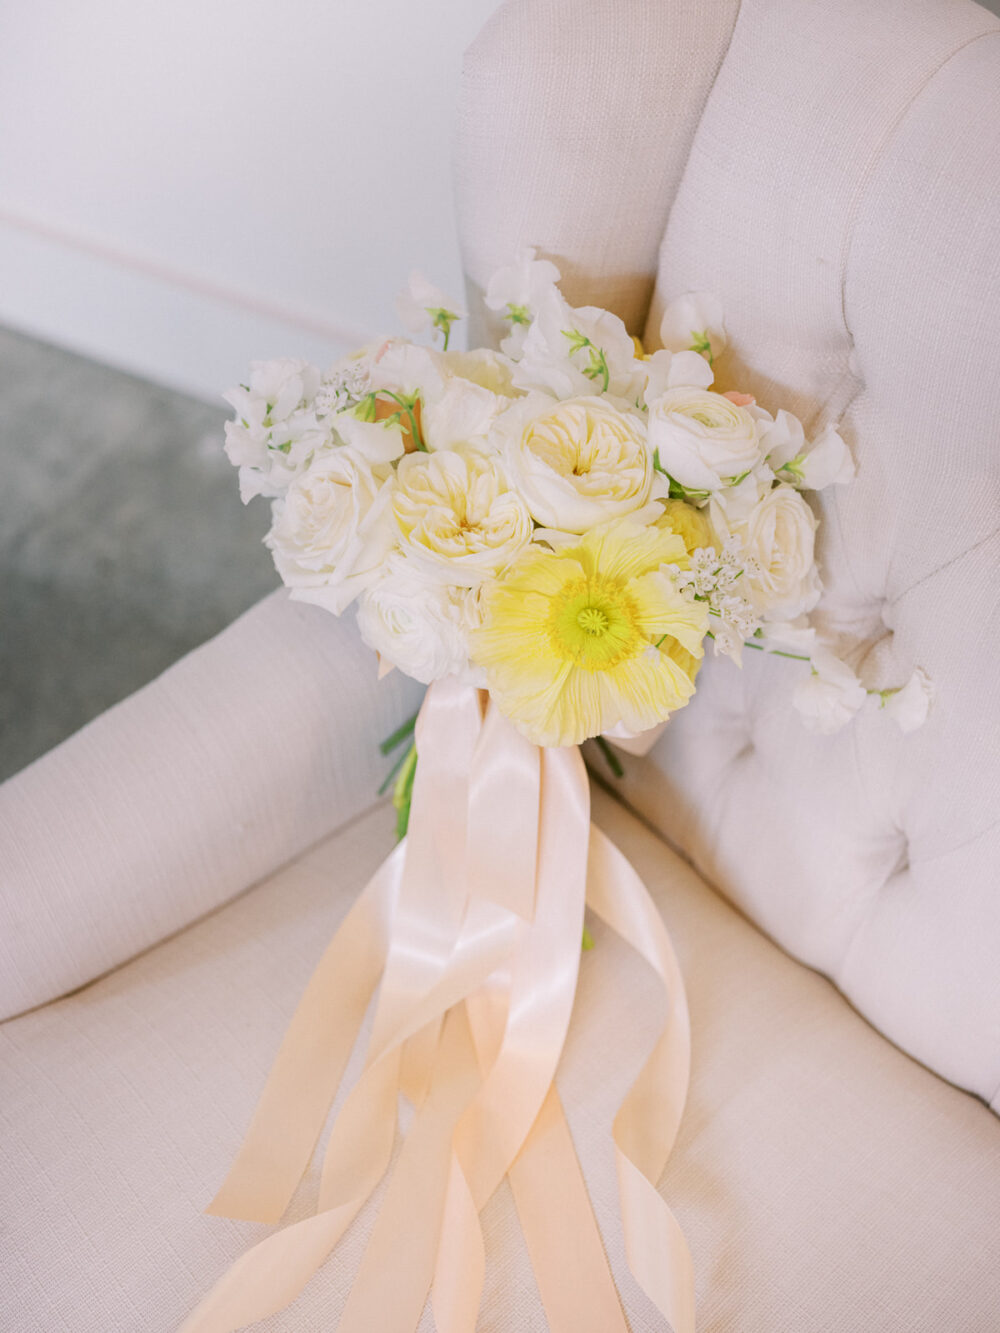 Soft romantic florals for a timeless Orlando wedding photographed by Juliana Kae